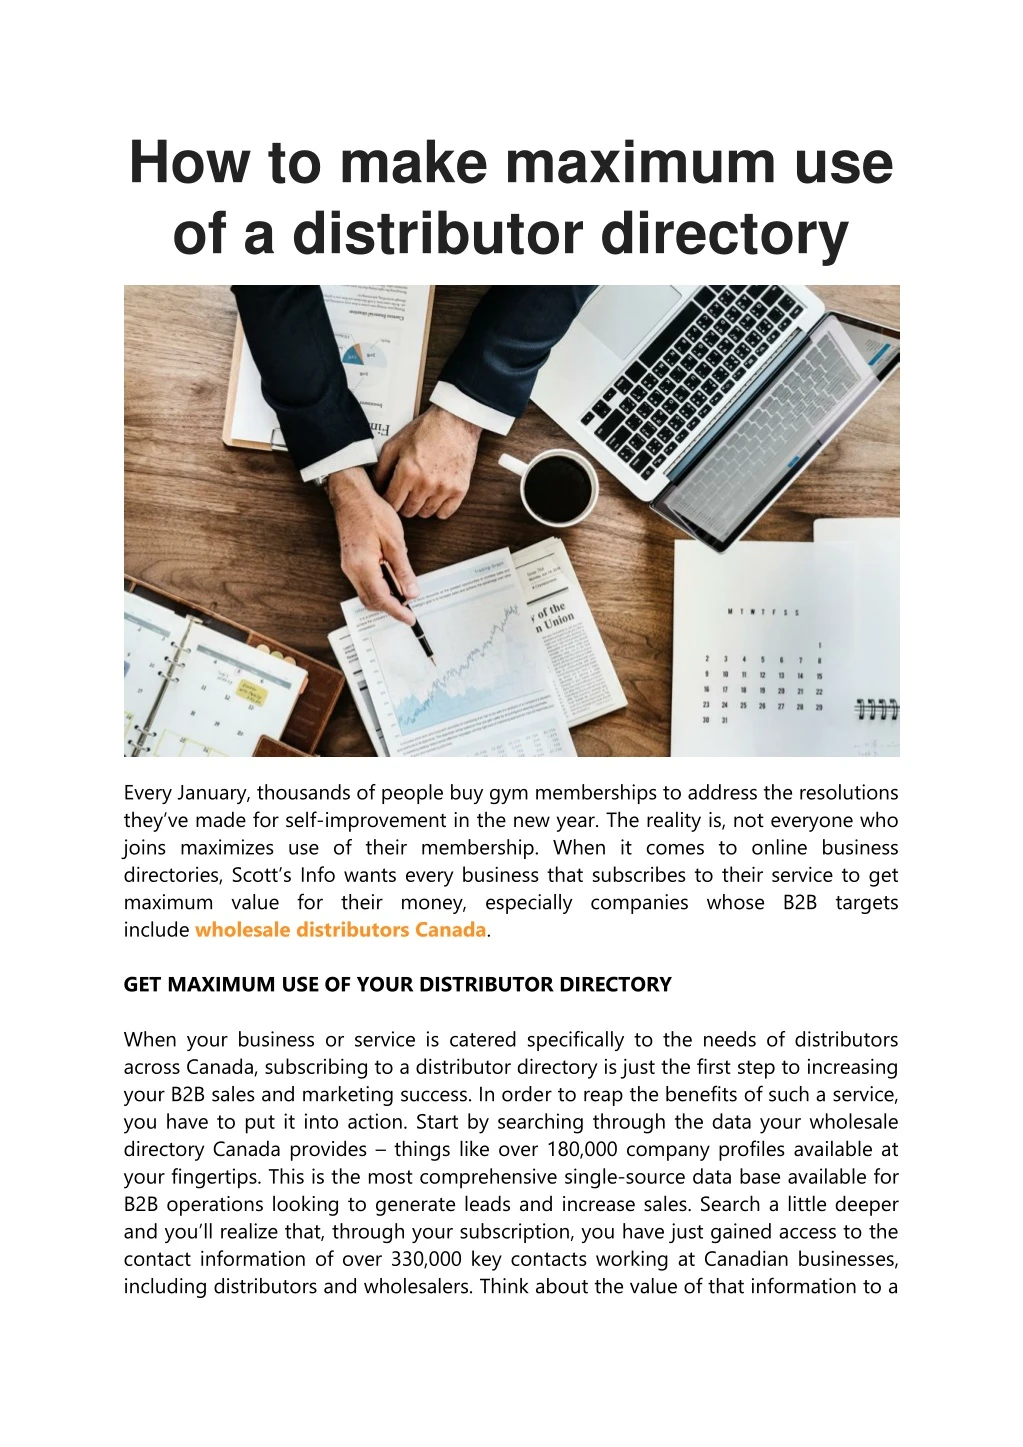 how to make maximum use of a distributor directory